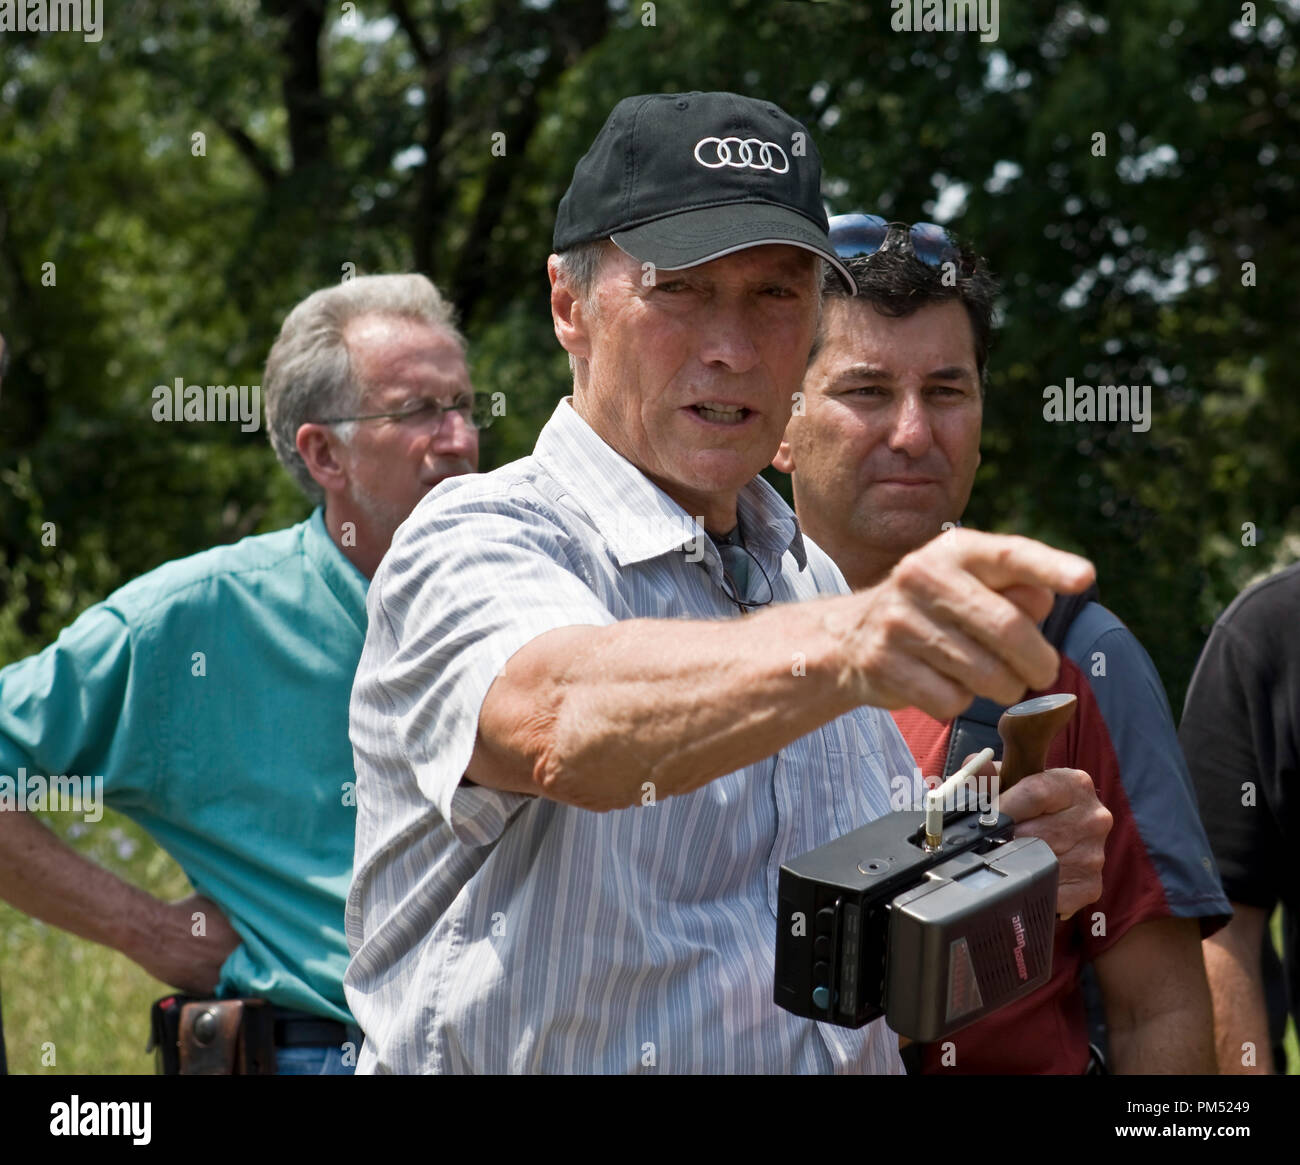 Film Still from 'Gran Torino' Director of photography Tom Stern, director Clint Eastwood, camera opertor Stephen S. Campanelli © 2008 Warner Brothers Photo Credit: Anthony Michael Rivetti Stock Photo